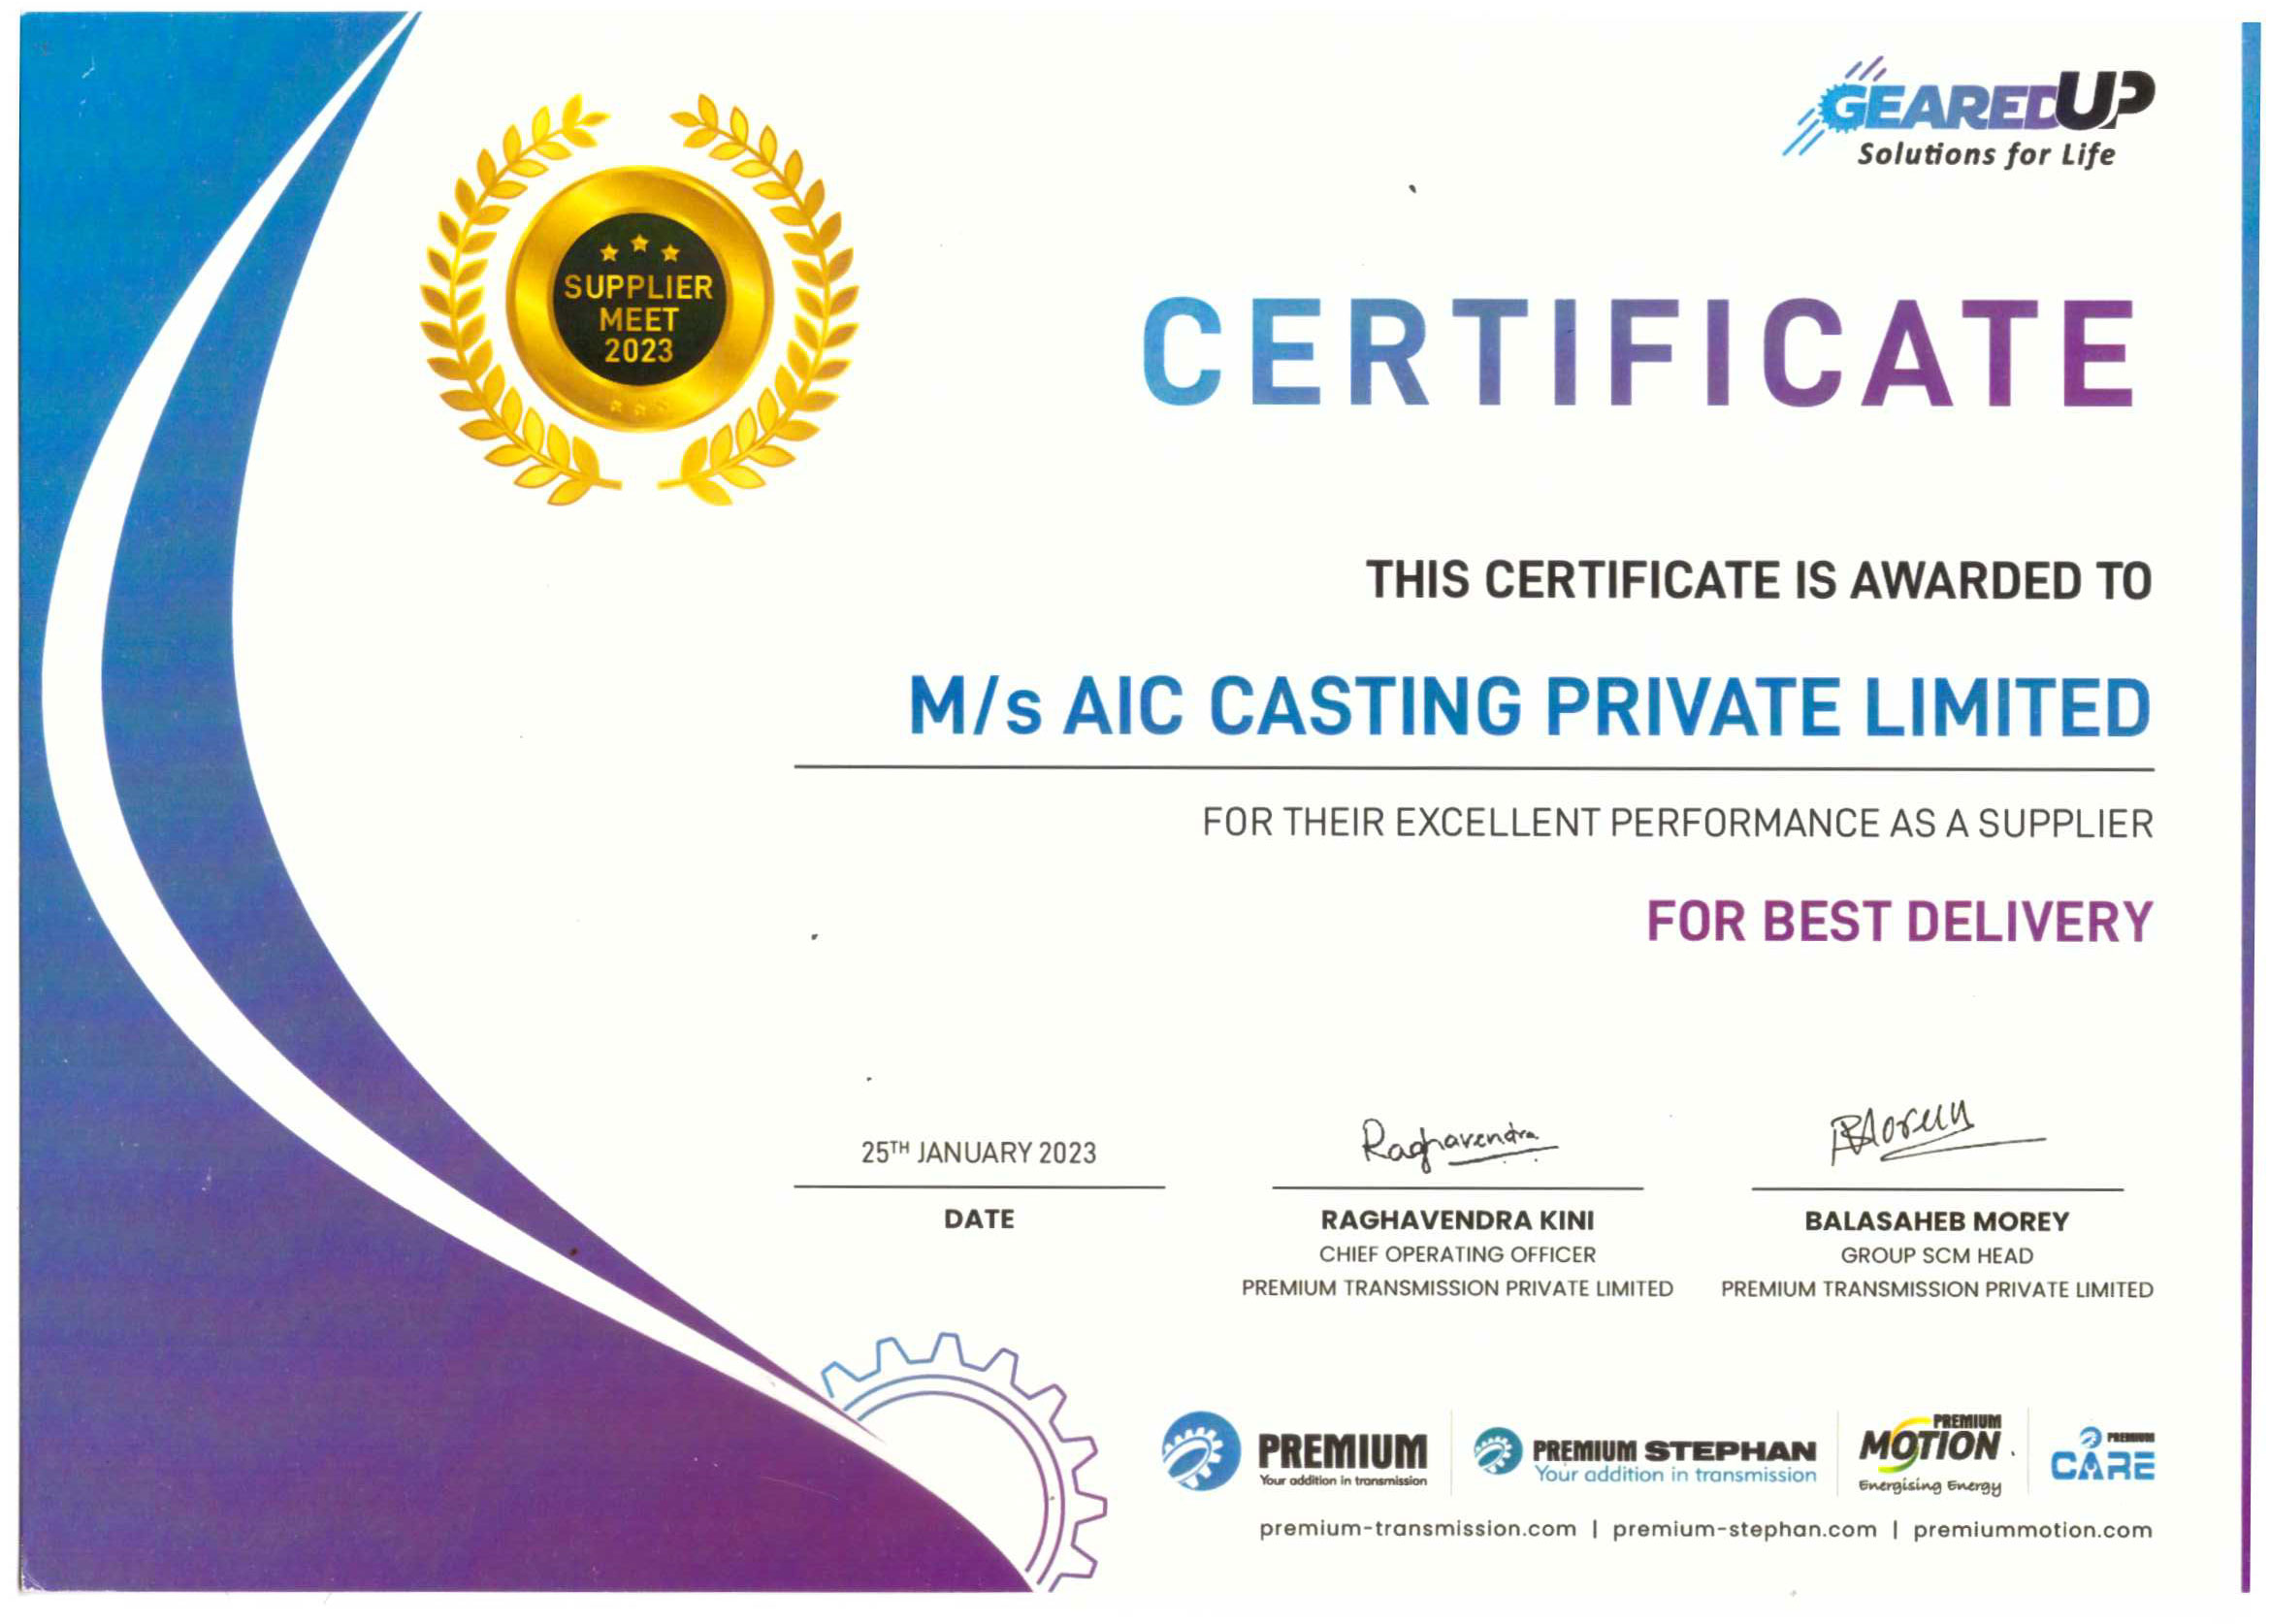 Excellent Performance as a Supplier | AIC Certification